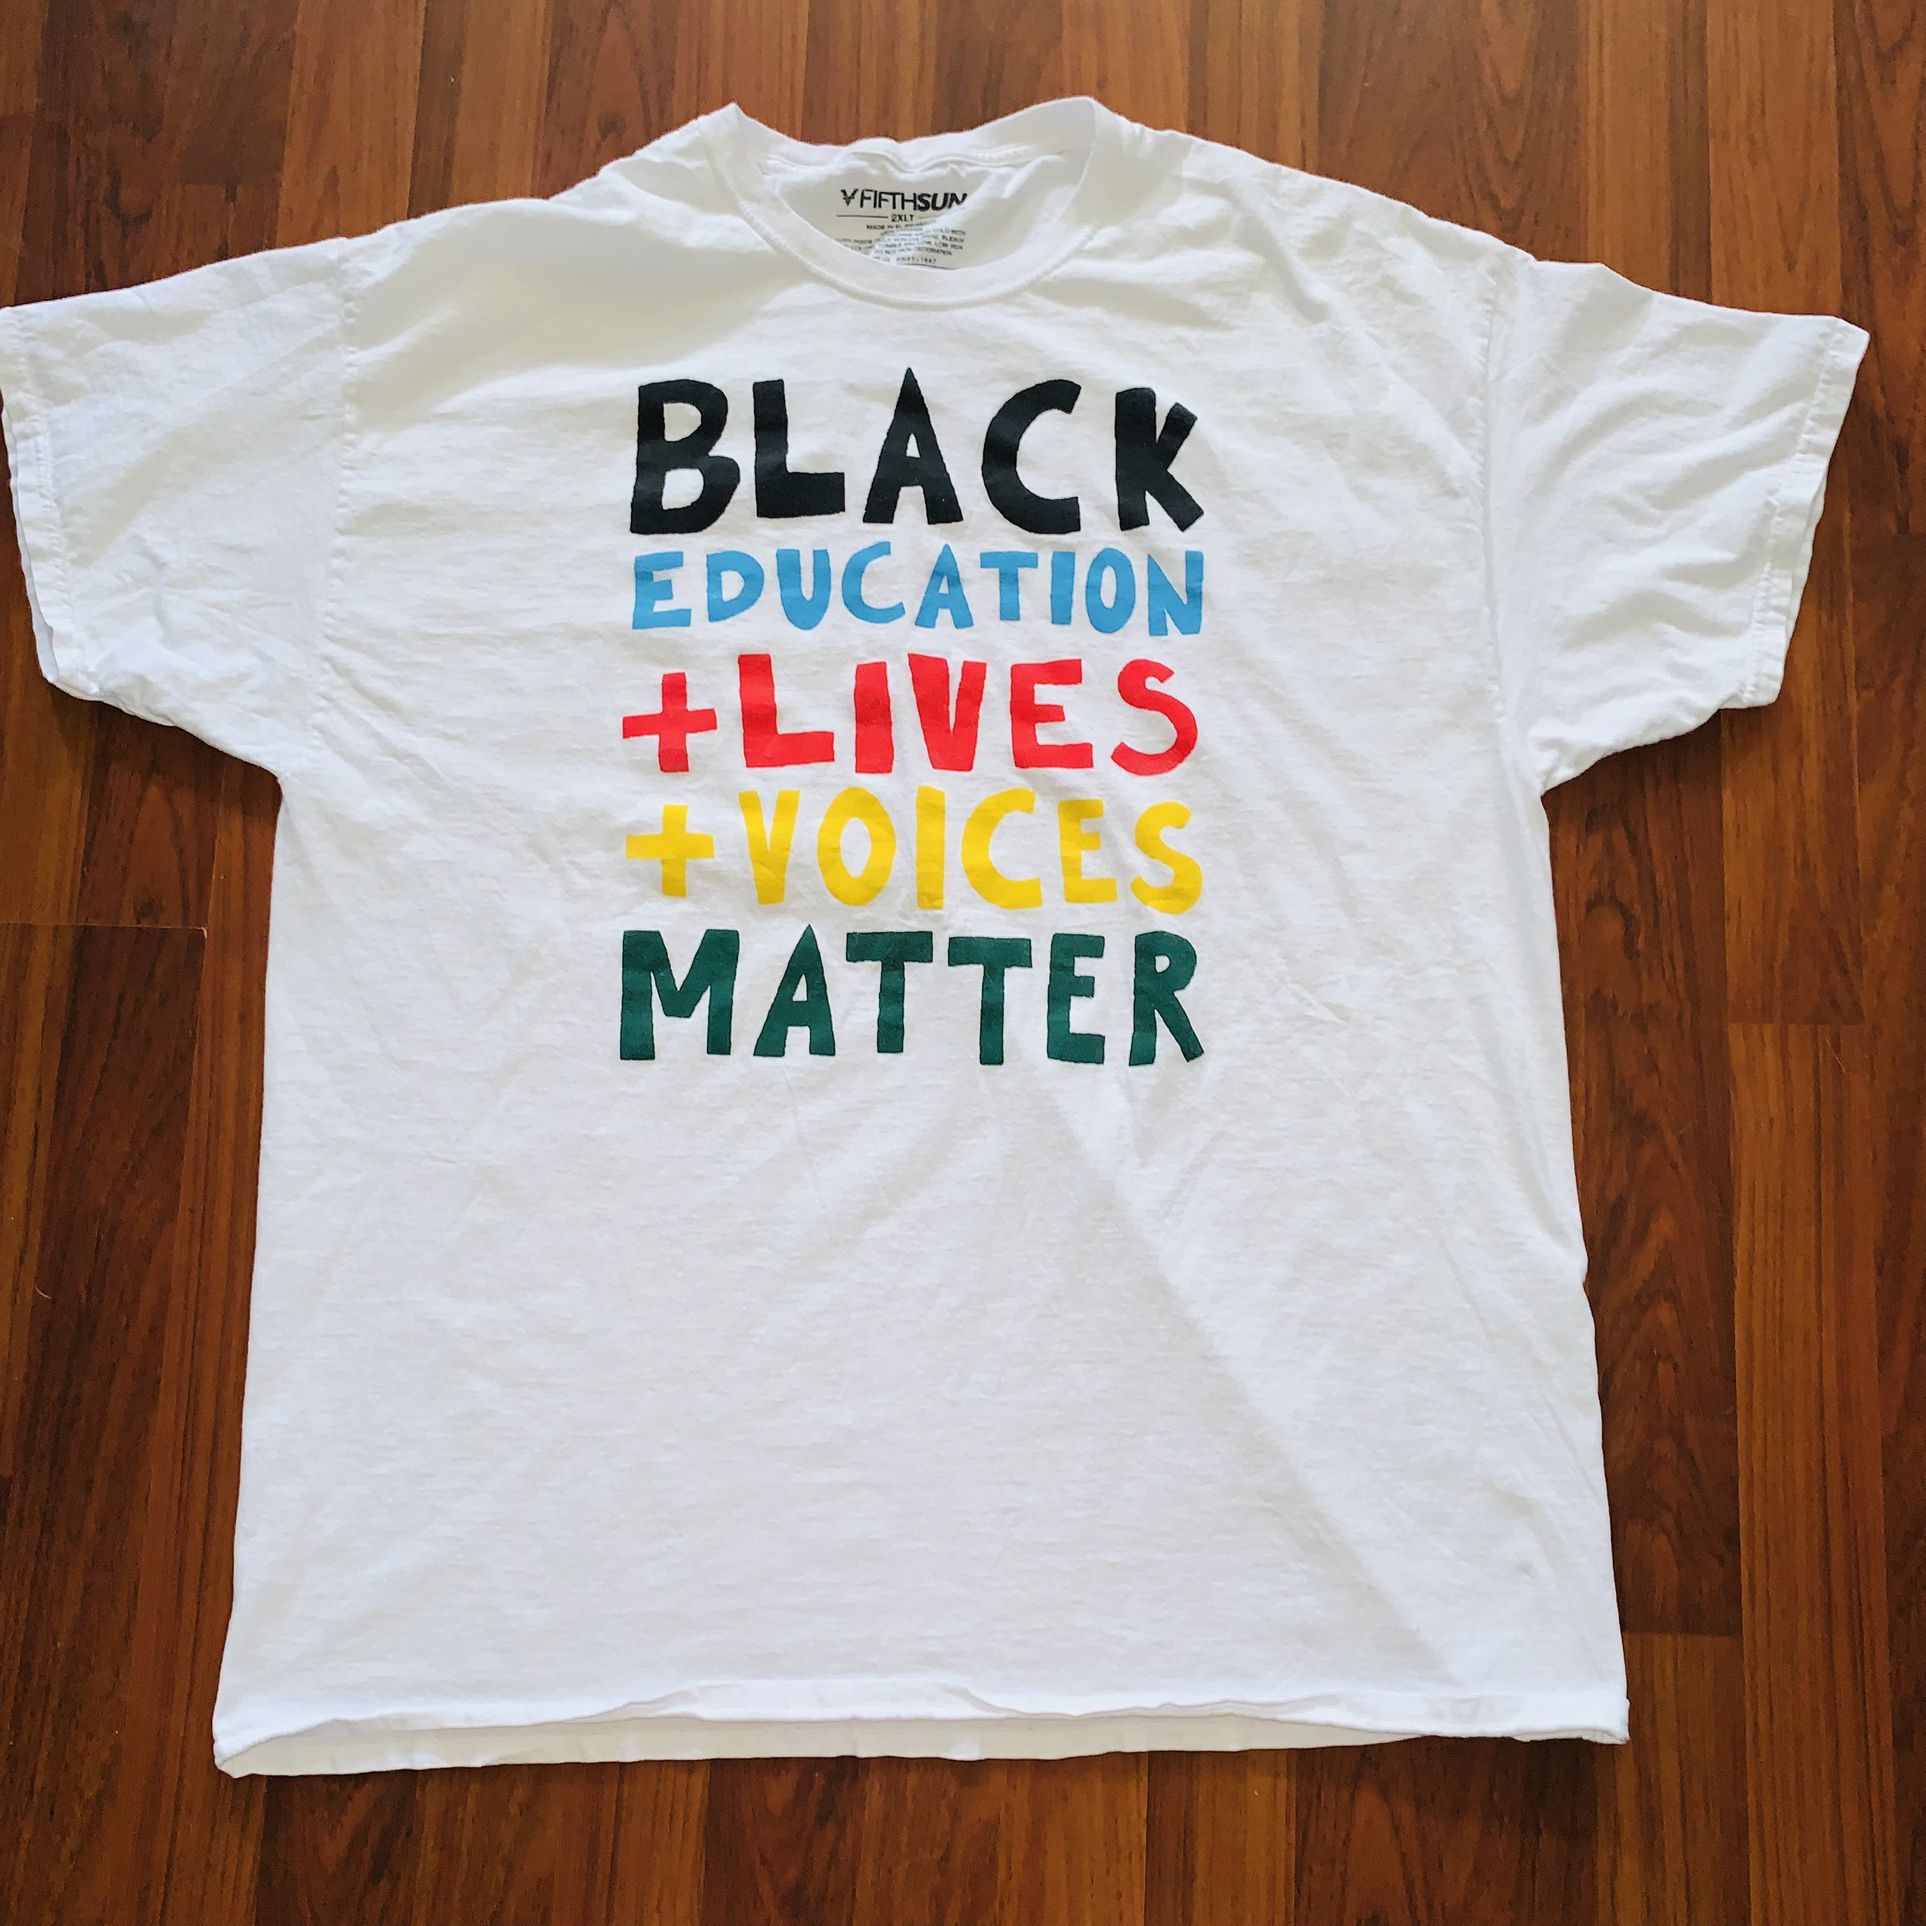 Fifth Sun Black Education, Lives, and Voices Matter 2XLT White T-Shirt